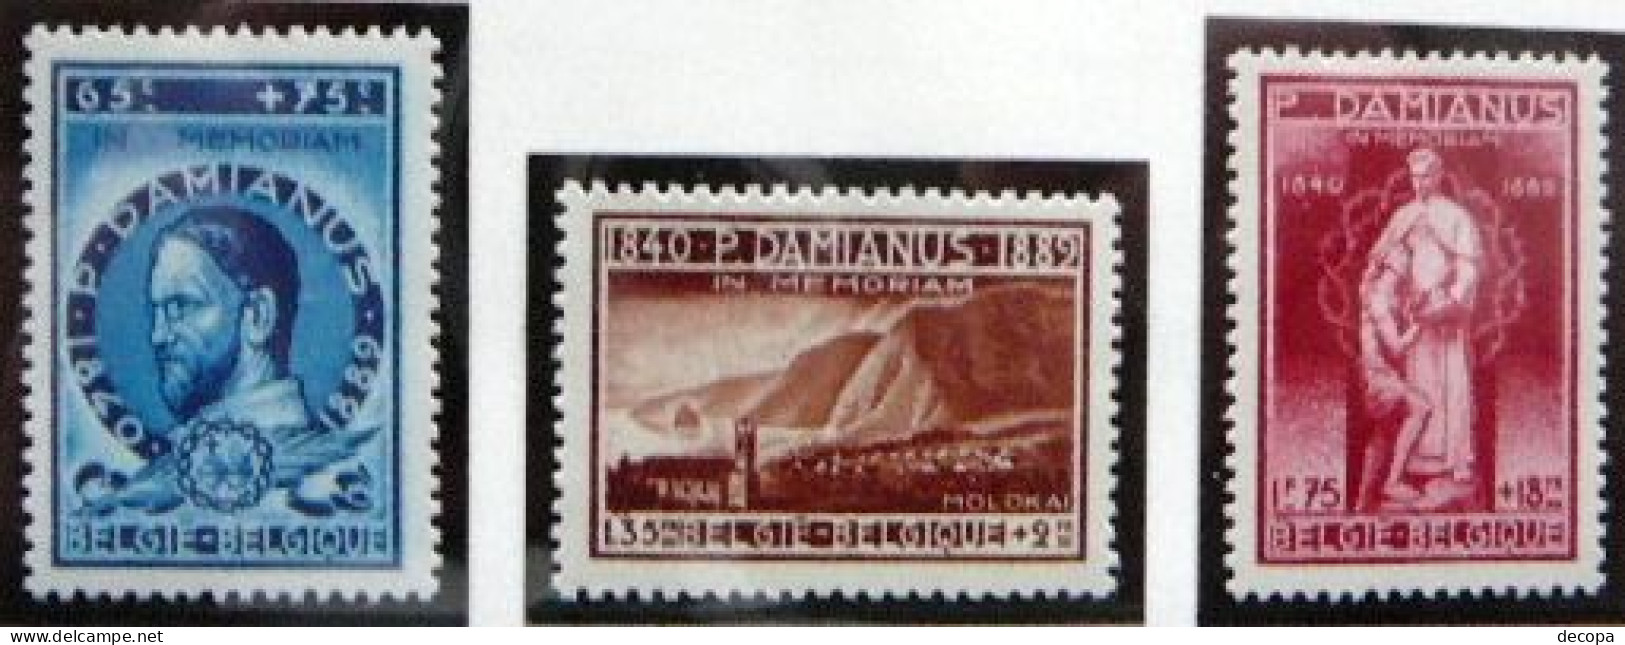 (dcbpf-322) Pater Damiaan   OBP  728-30    1946   MNH - Unused Stamps